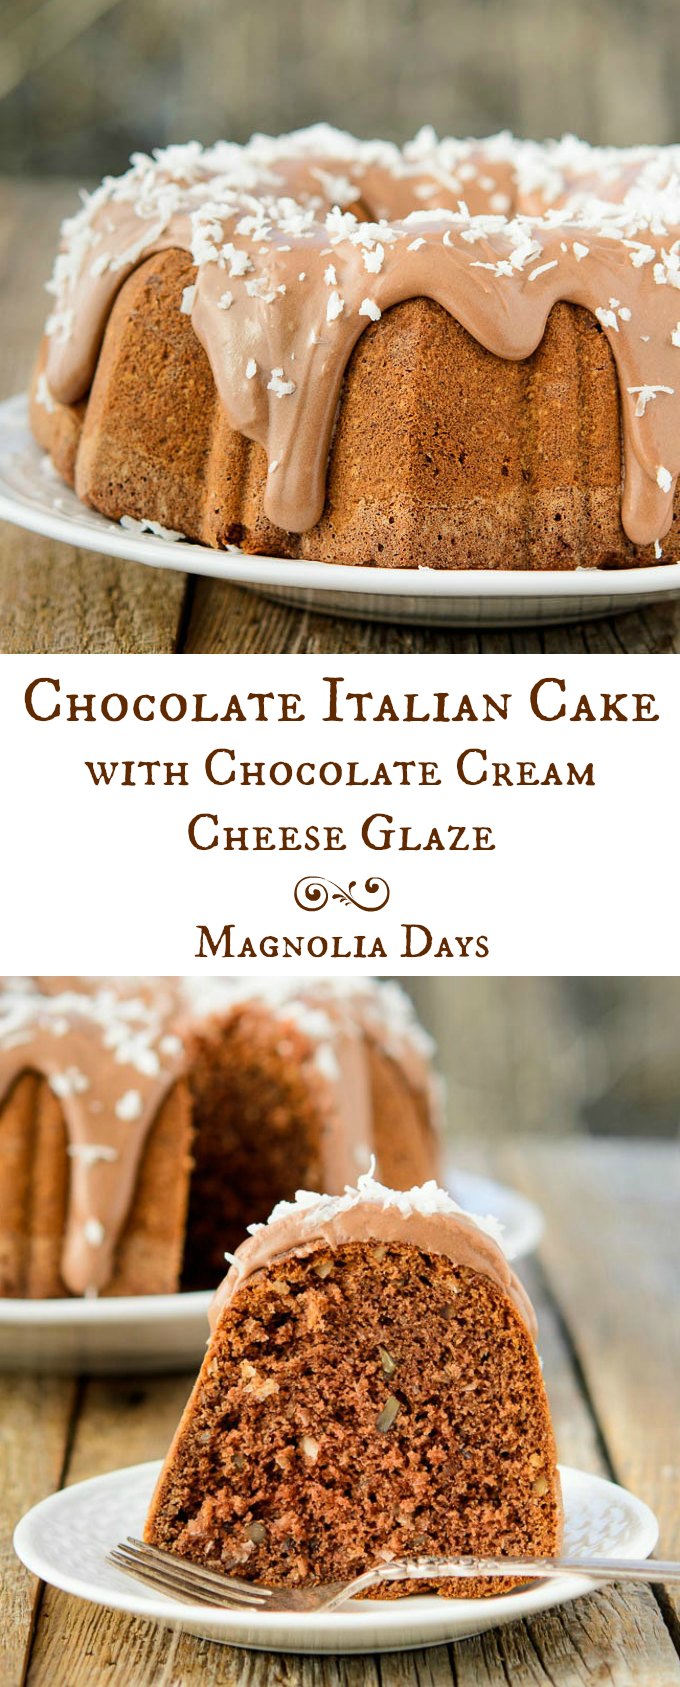 Chocolate Italian Cake with Chocolate Cream Cheese Glaze is German Chocolate Cake meets Italian Cream Cake in a most delicious way. And it's a bundt too!